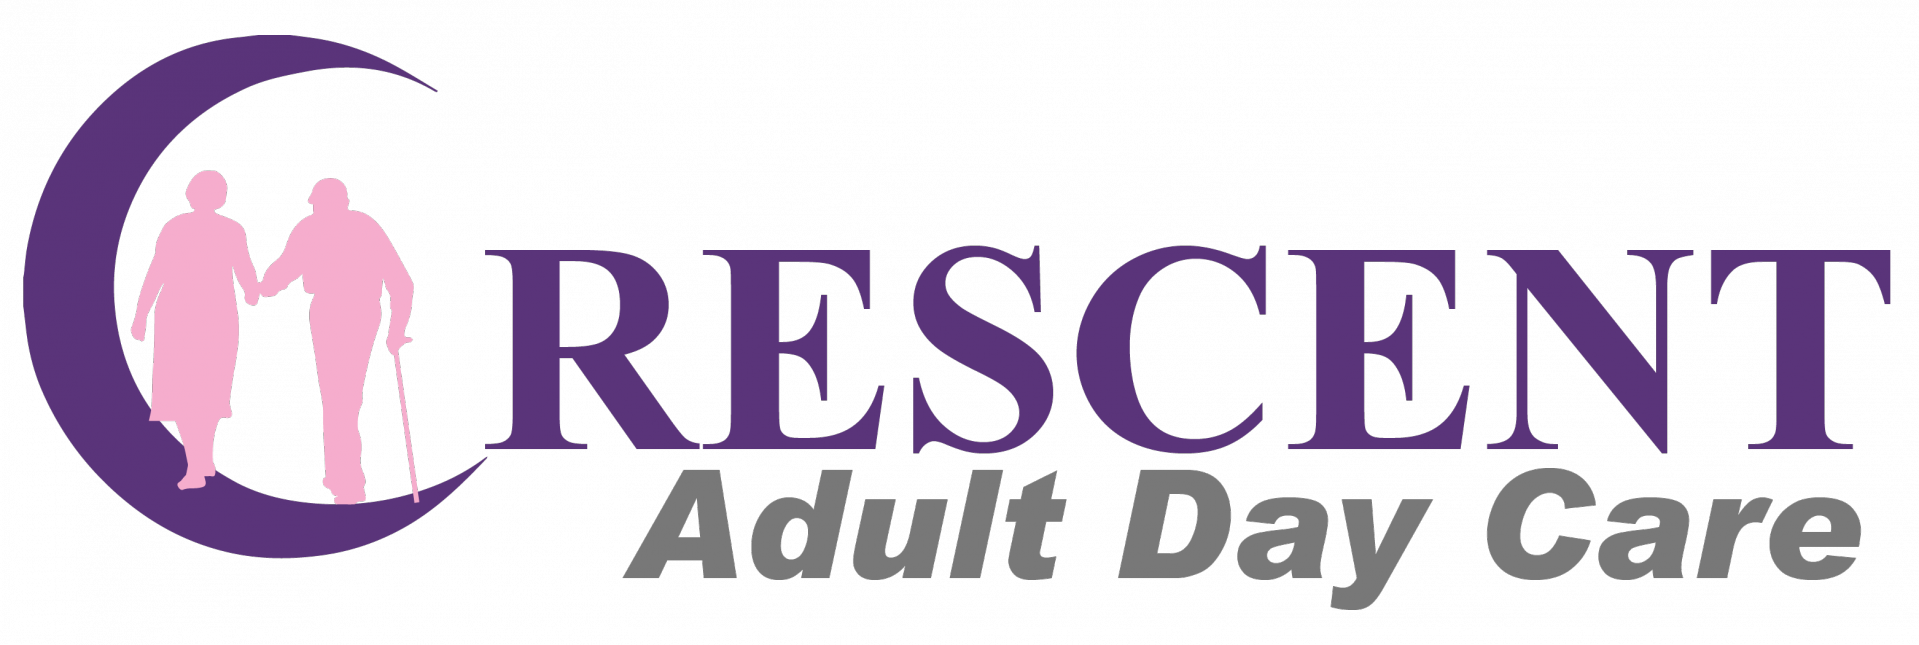 CRESCENT ADULT DAY CARE INC's Logo